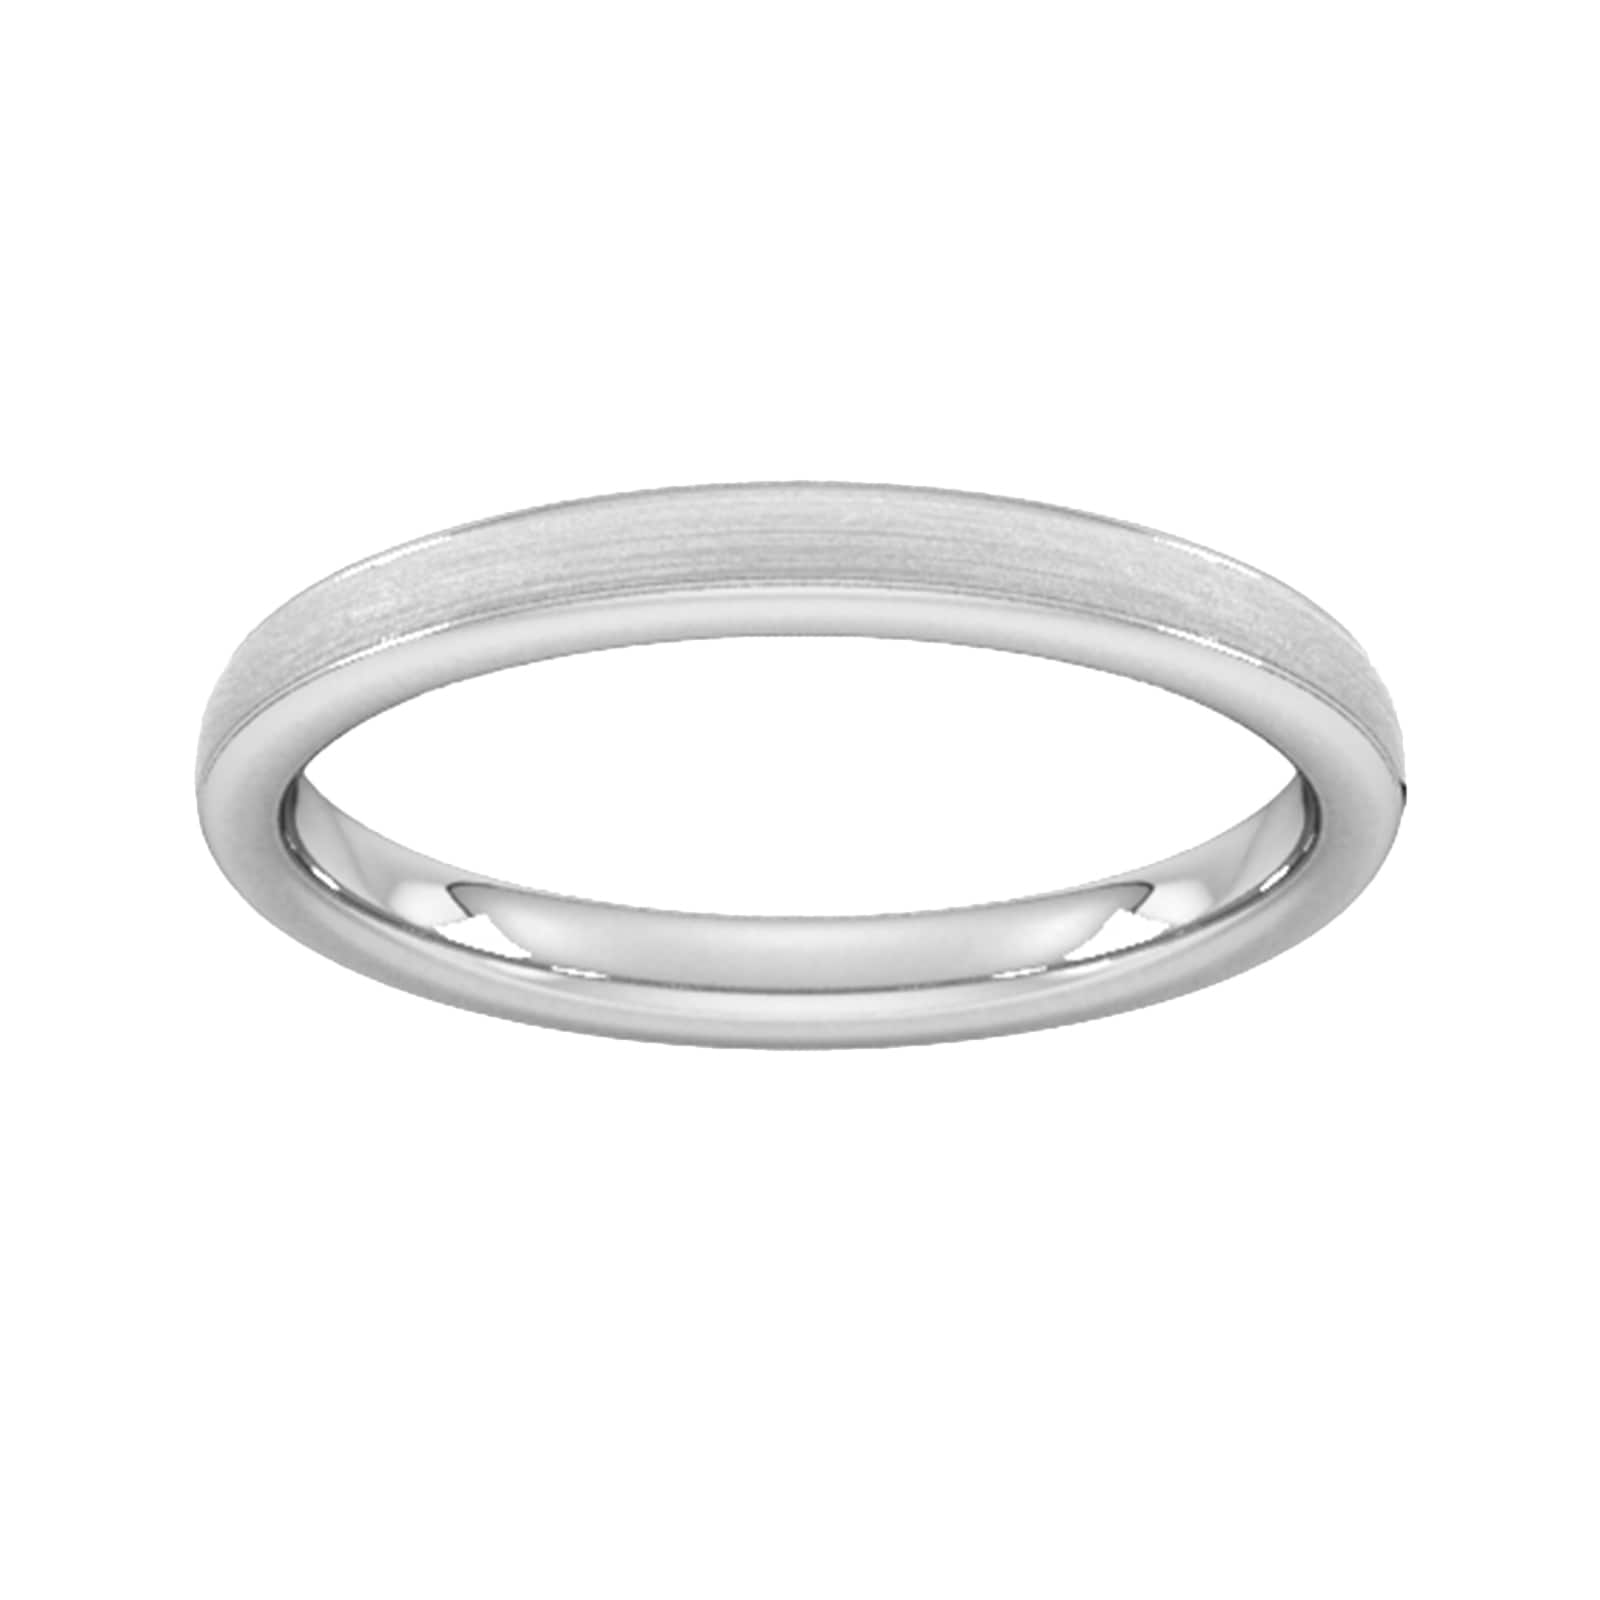 2.5mm Flat Court Heavy Matt Centre With Grooves Wedding Ring In Platinum - Ring Size M